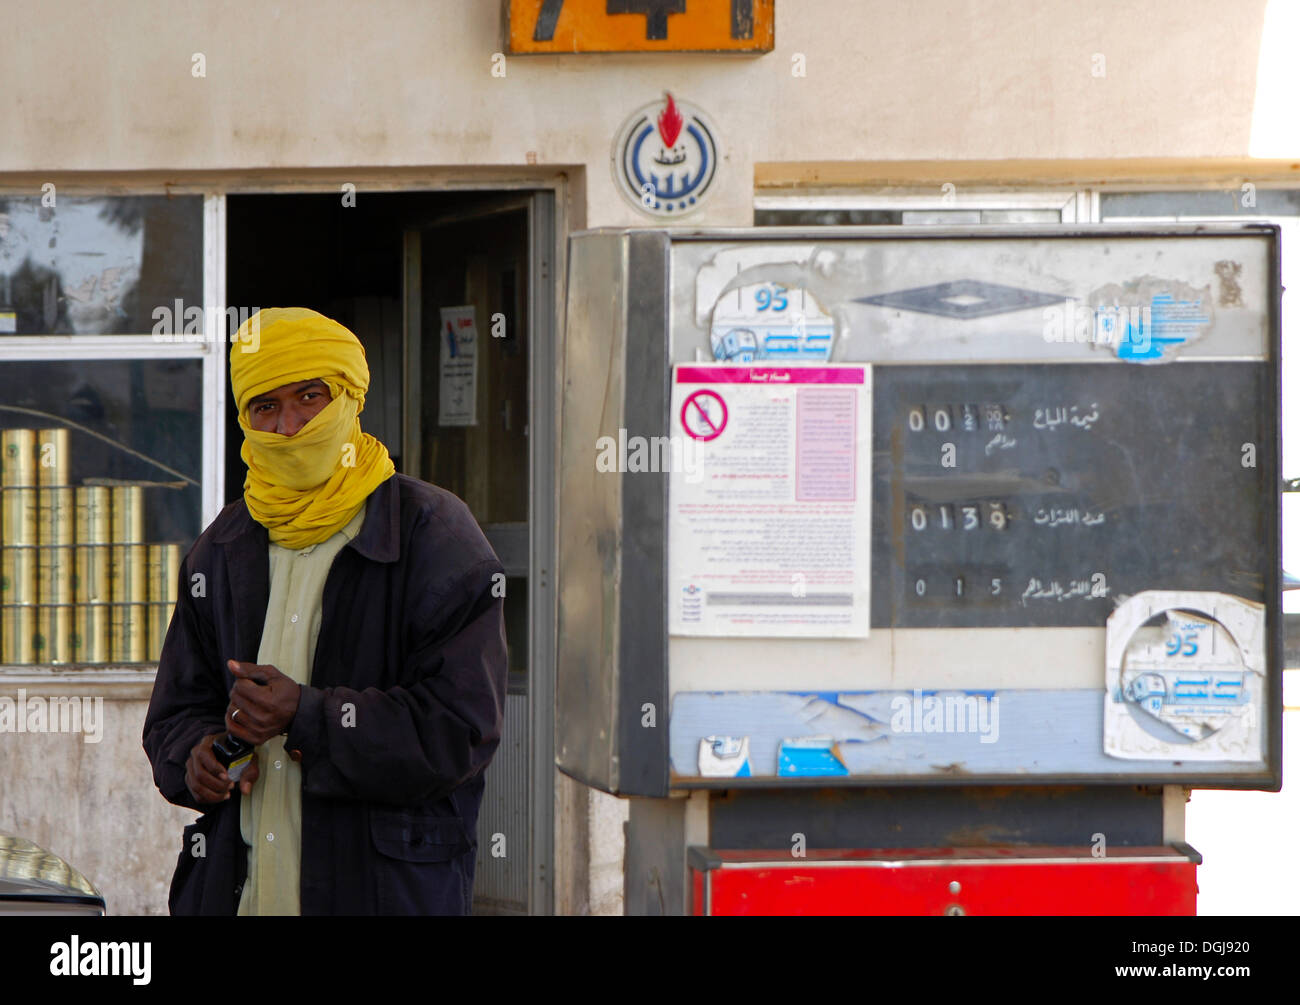 Arab gas station operator with a yellow turban next to a petrol pump at a gas station, Germa, Libya, Africa Stock Photo